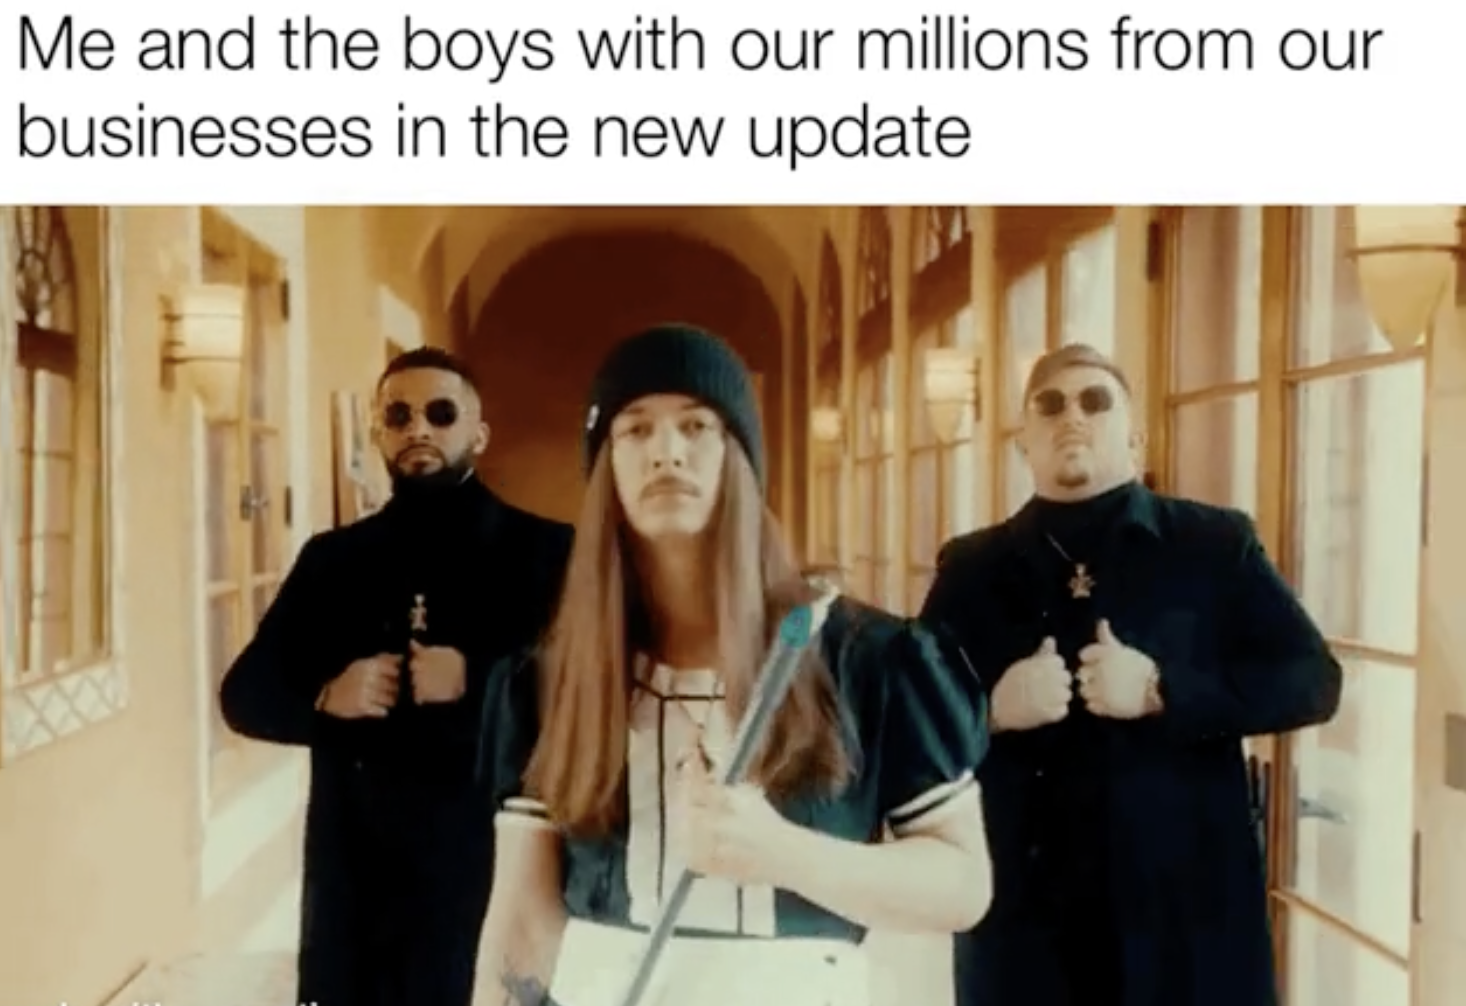 GTA V Memes - ceu business school - Me and the boys with our millions from our businesses in the new update